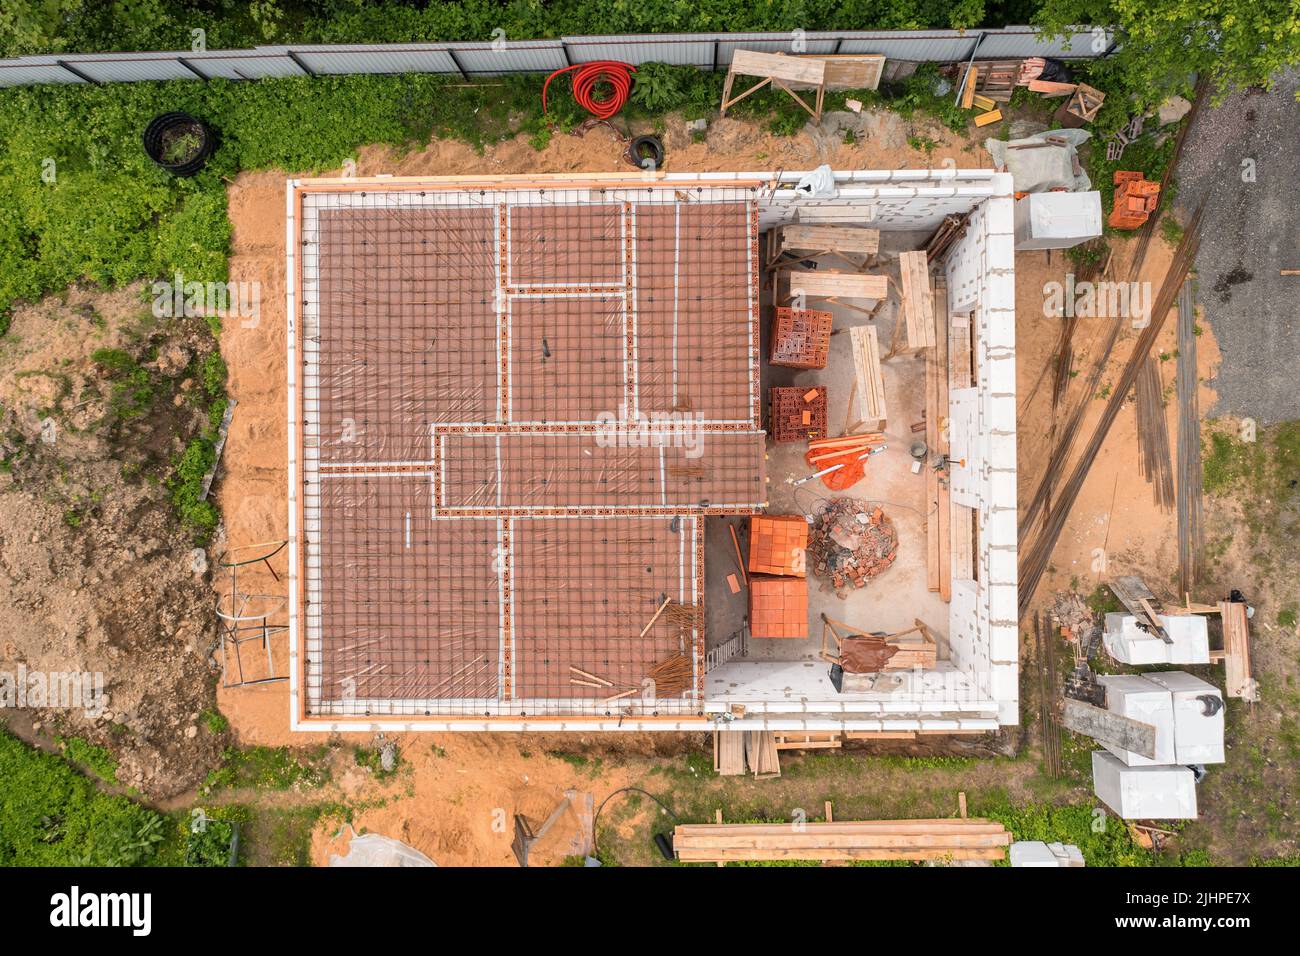 Country house under construction with building materials, tools and garbage. Directly above aerial view Stock Photo